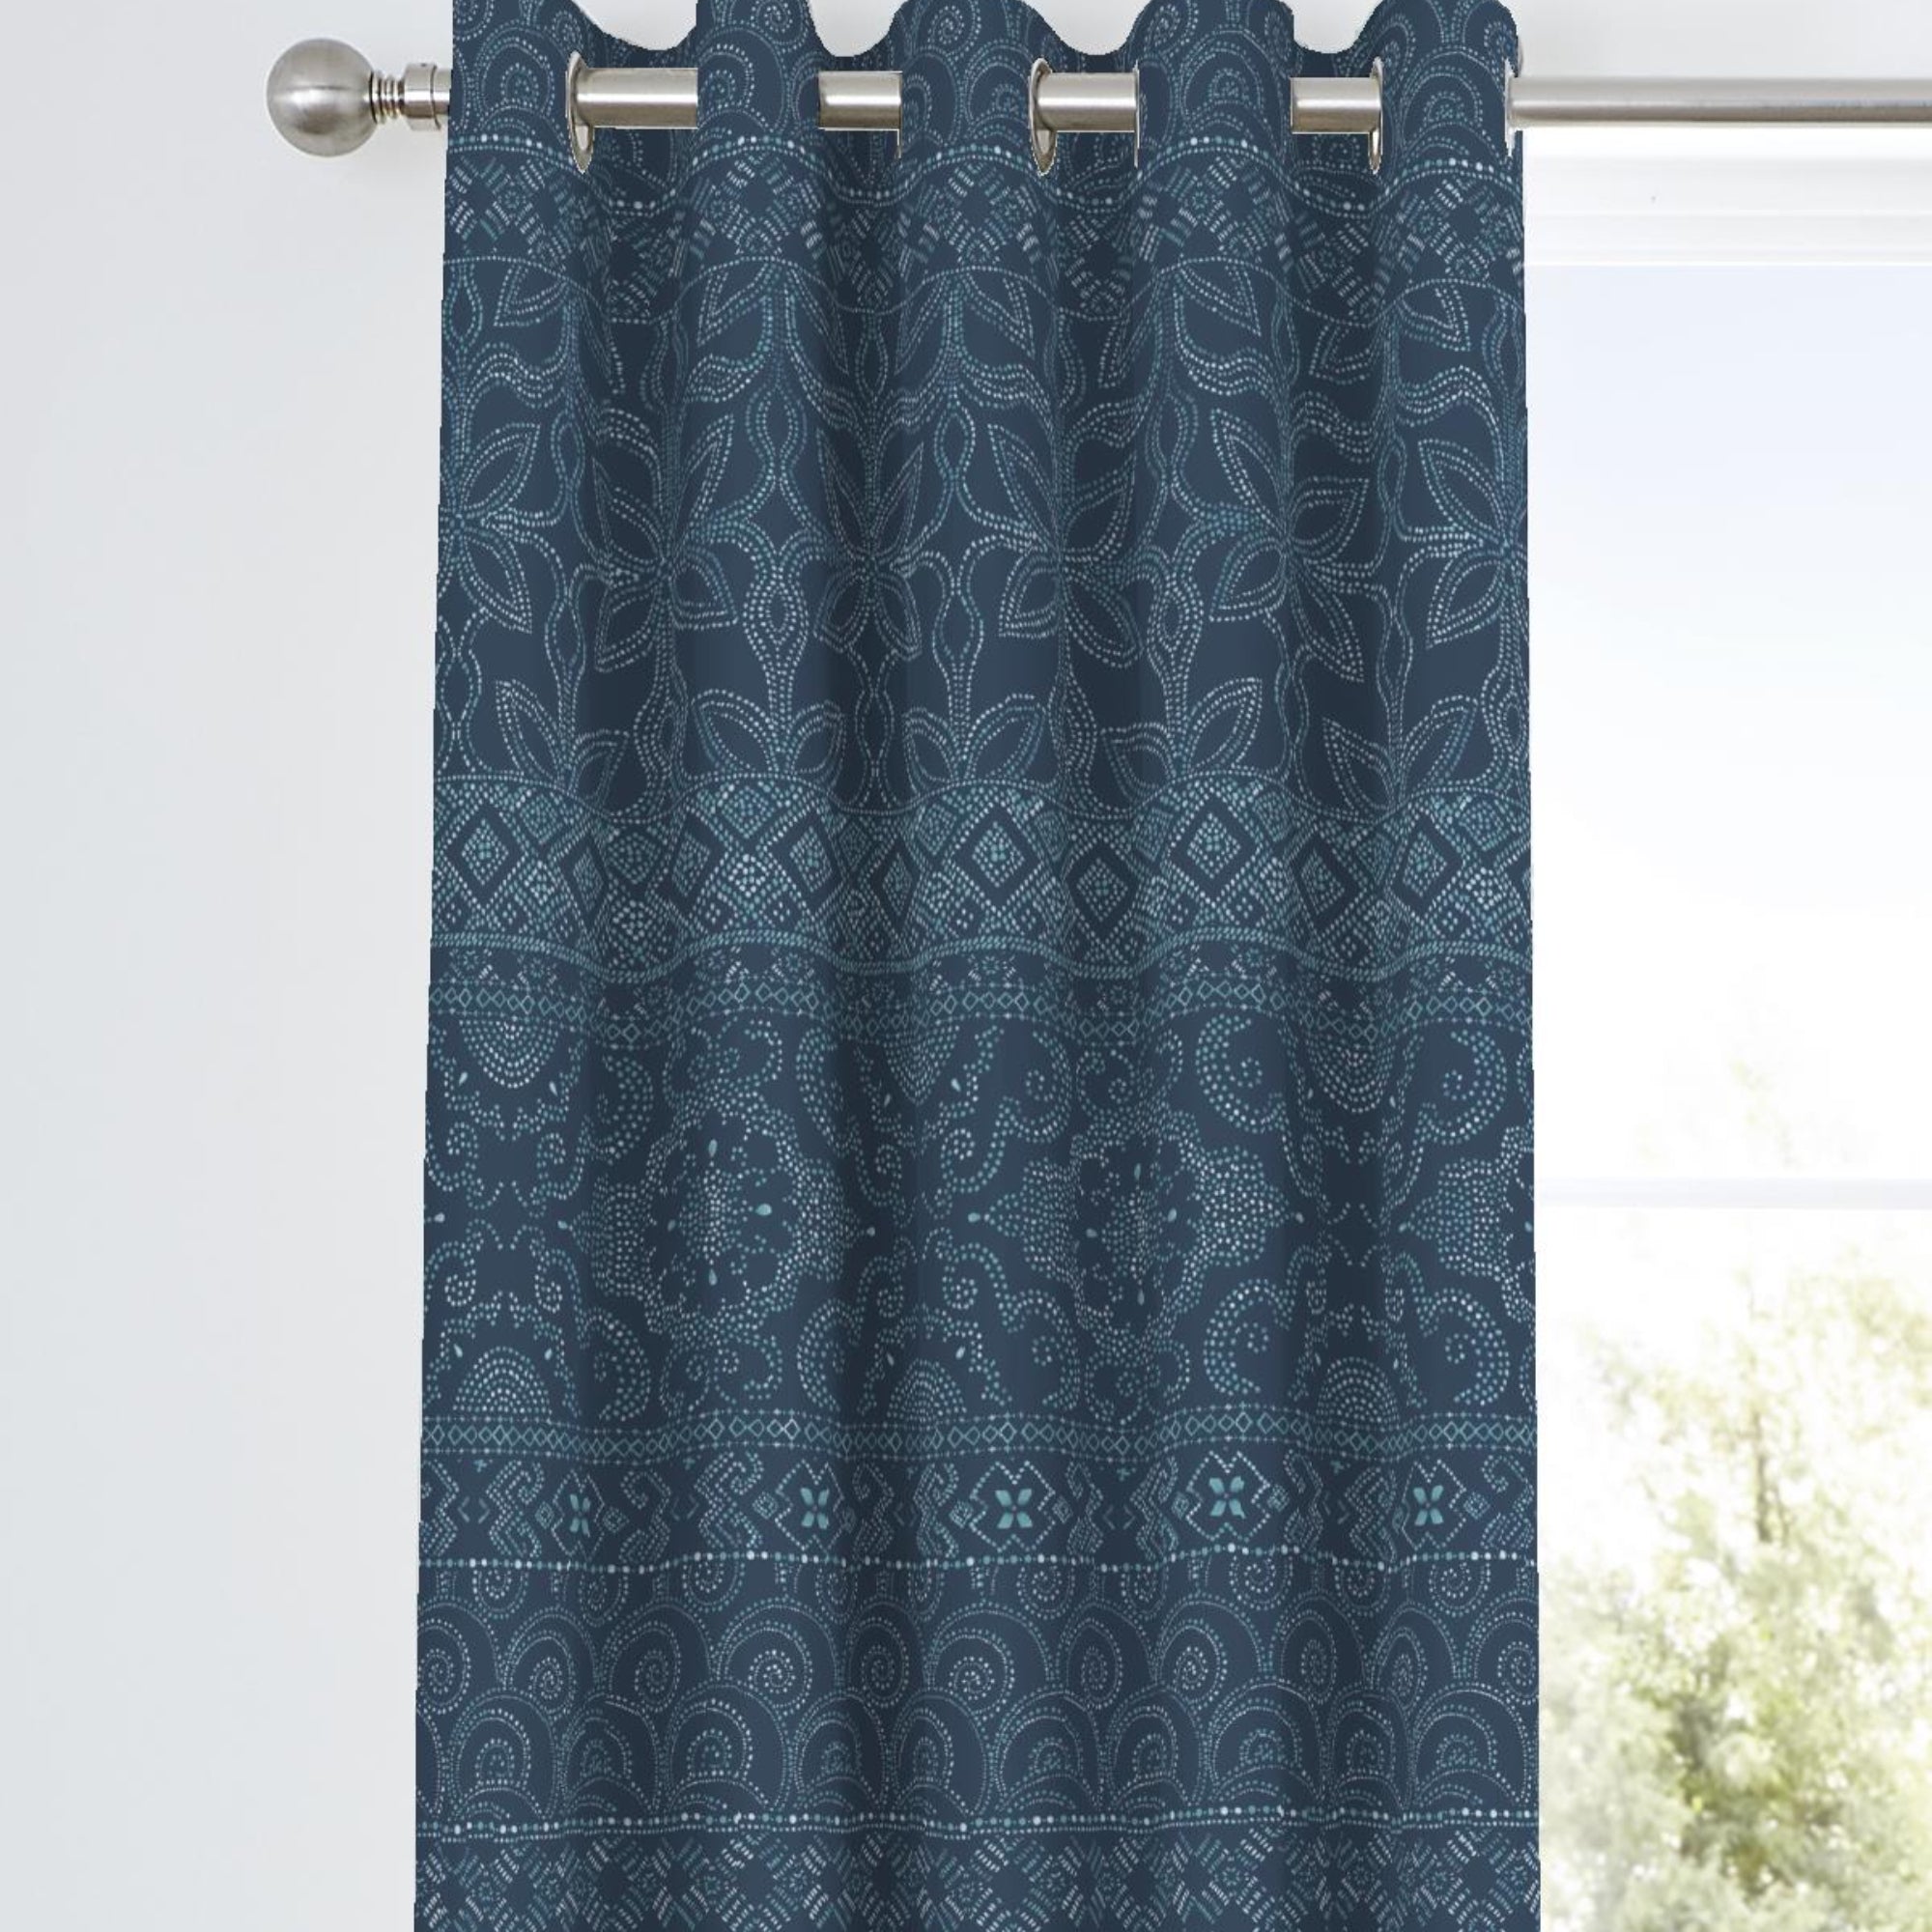 Pair of Eyelet Curtains Rohini by Dreams & Drapes Design in Blue